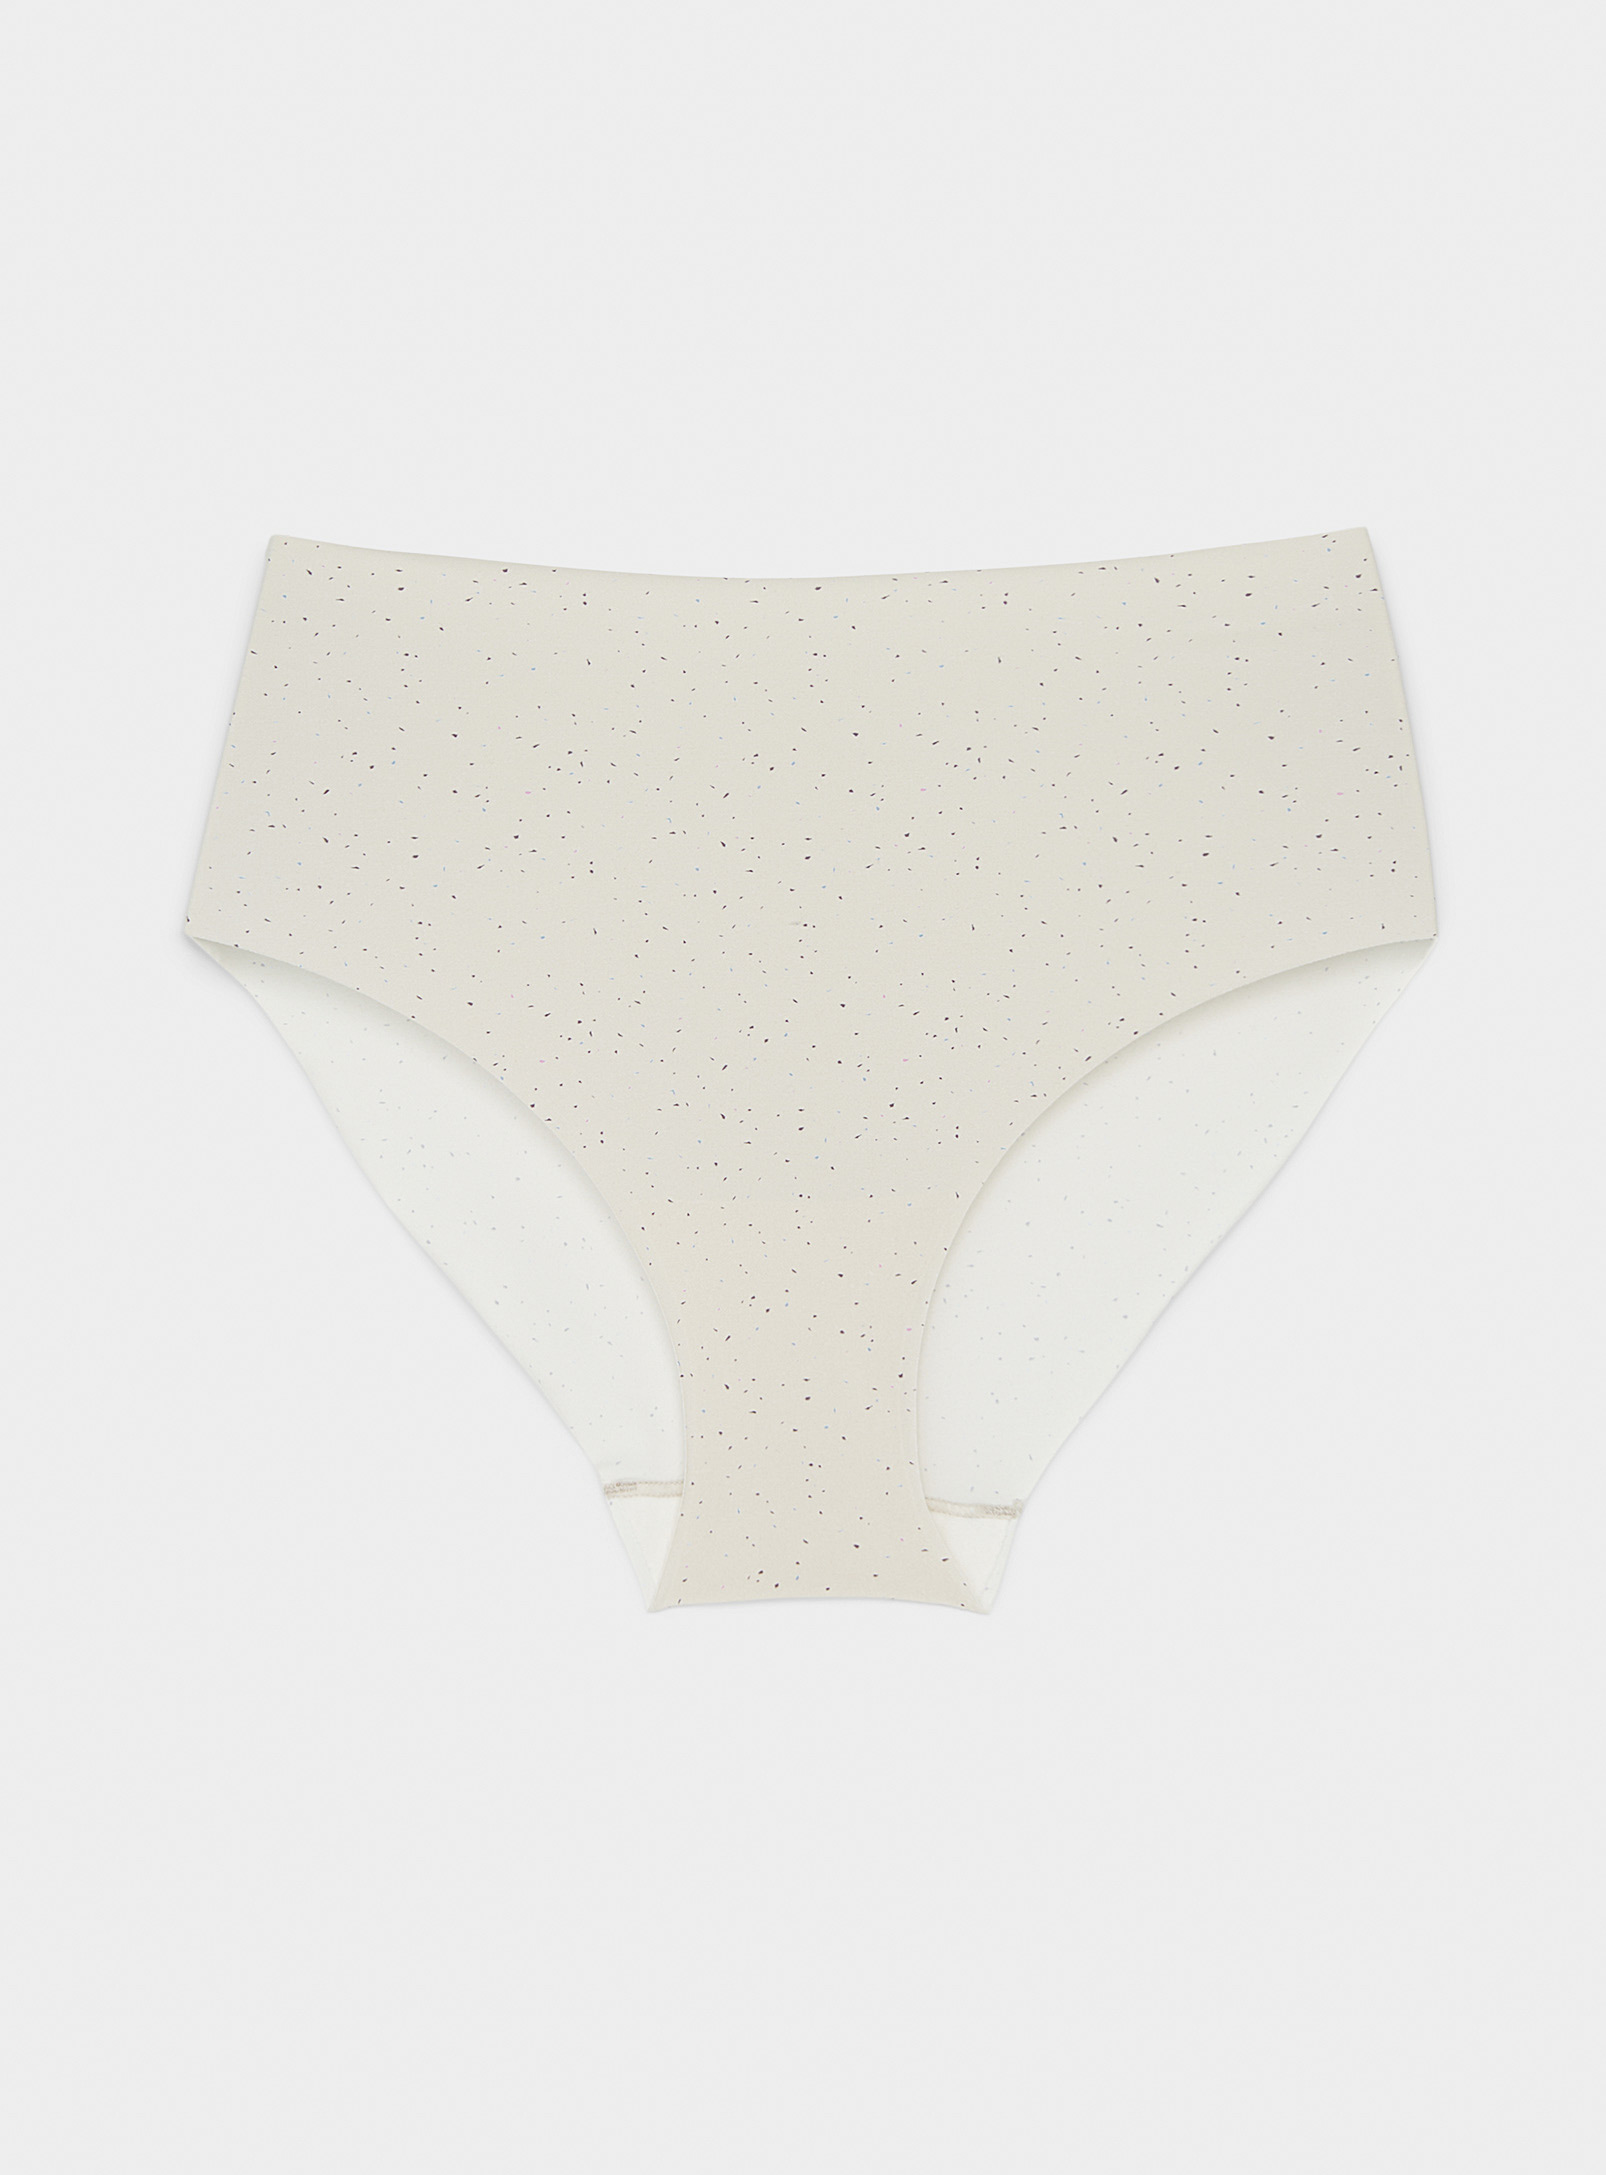 Miiyu Recycled Nylon High-waisted Laser-cut Panty In Patterned Ecru